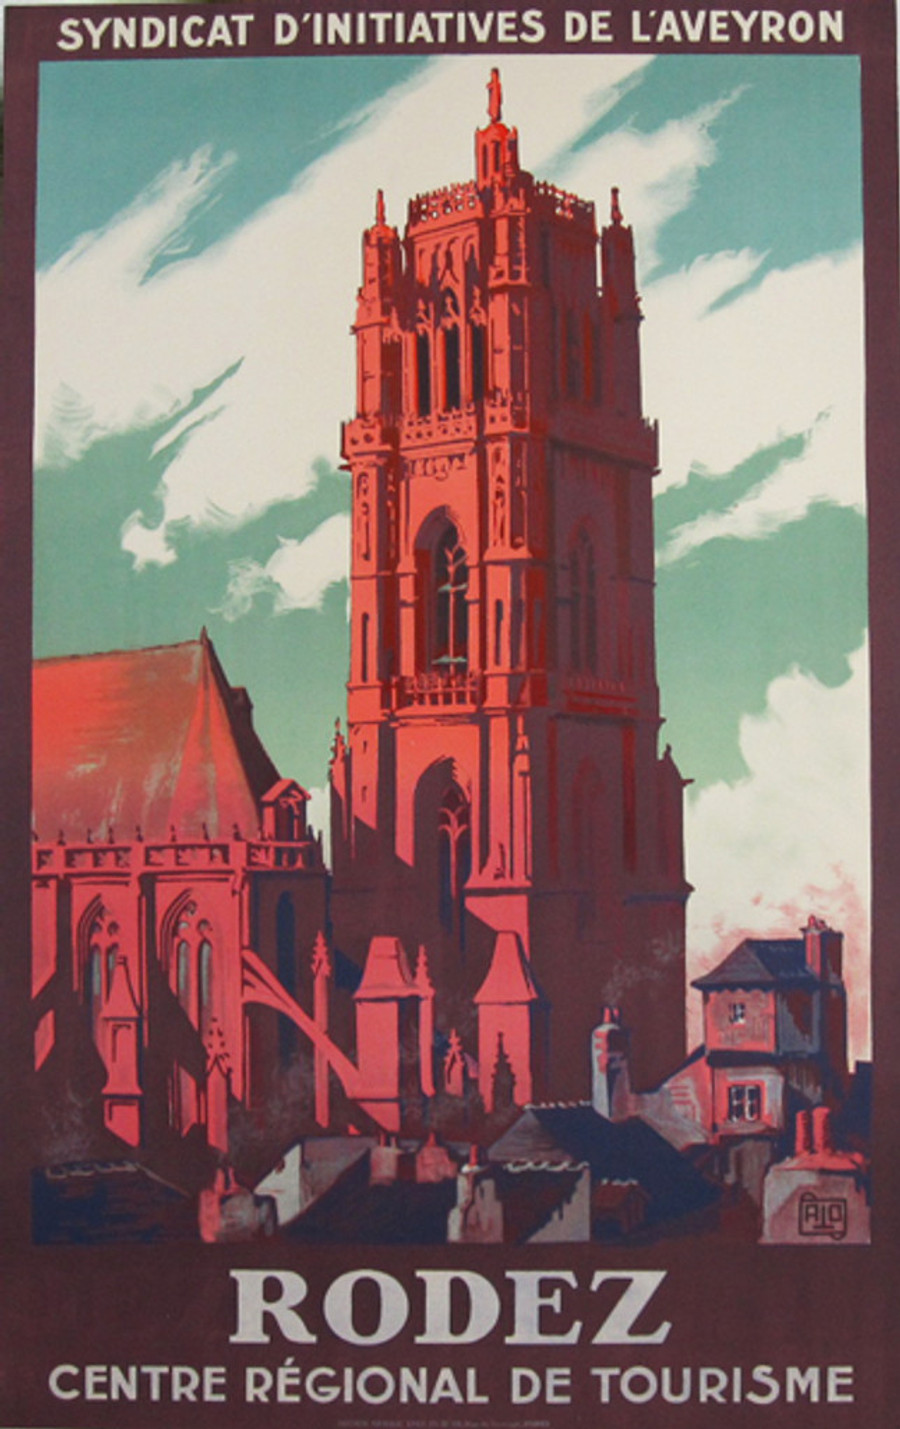 Antique French travel poster by Charles Hallo printed circa 1926. A condition. Mounted on archival linen.